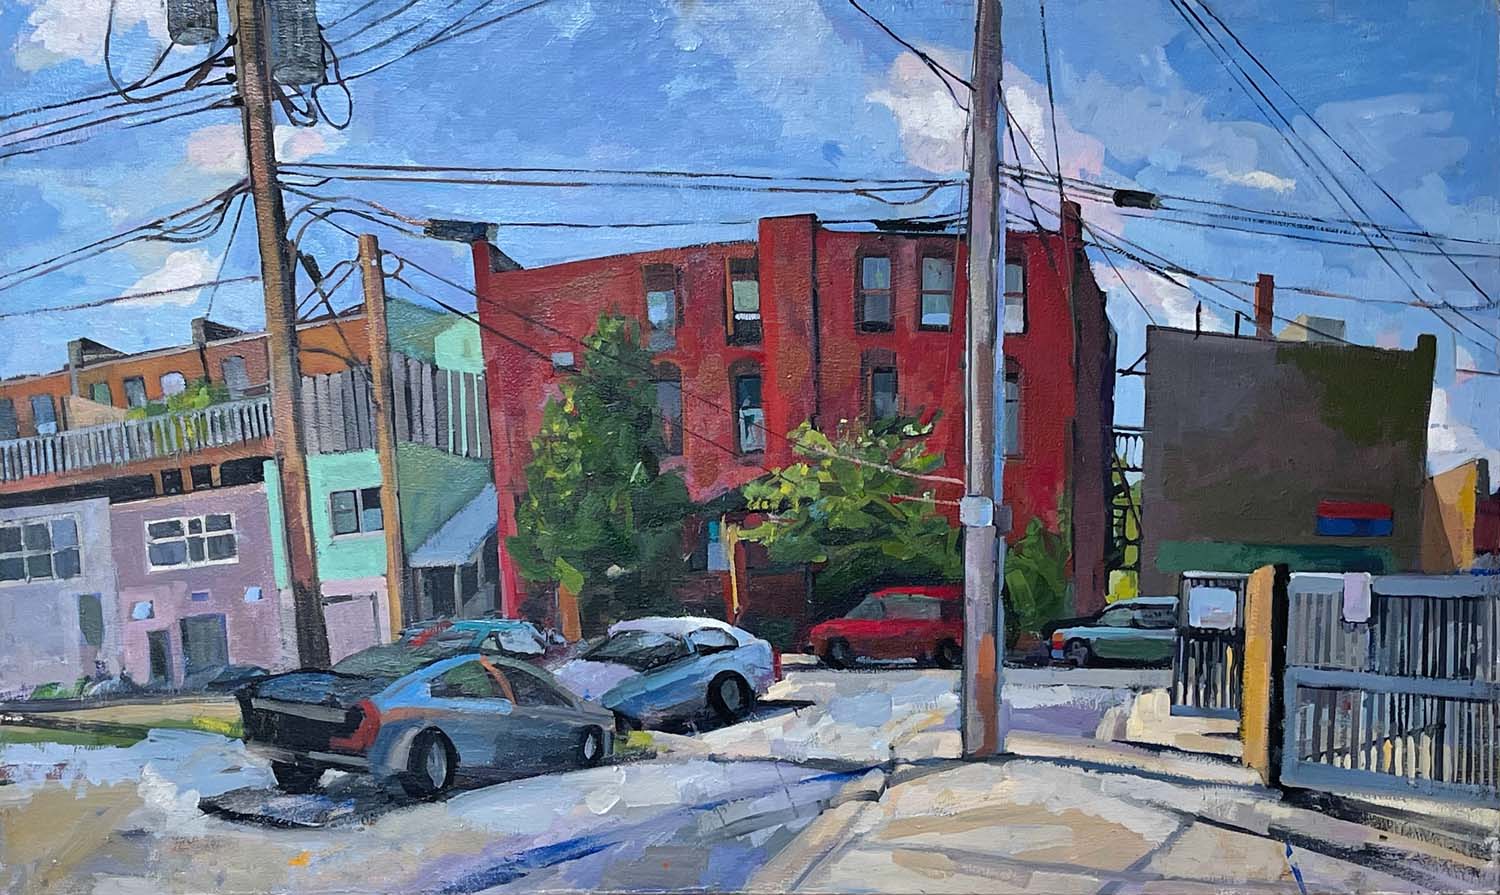 Red Hotel, 24" by 40", oil, 2019